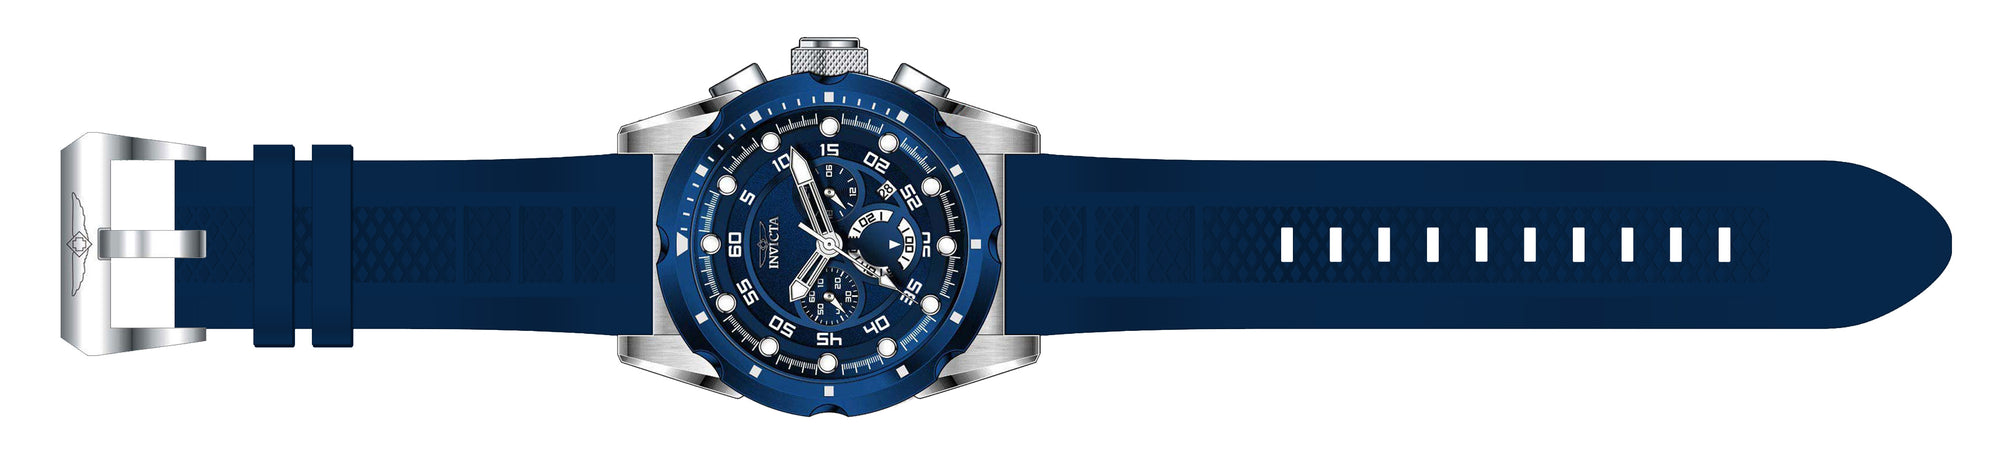 Band for Invicta Speedway Men 41560